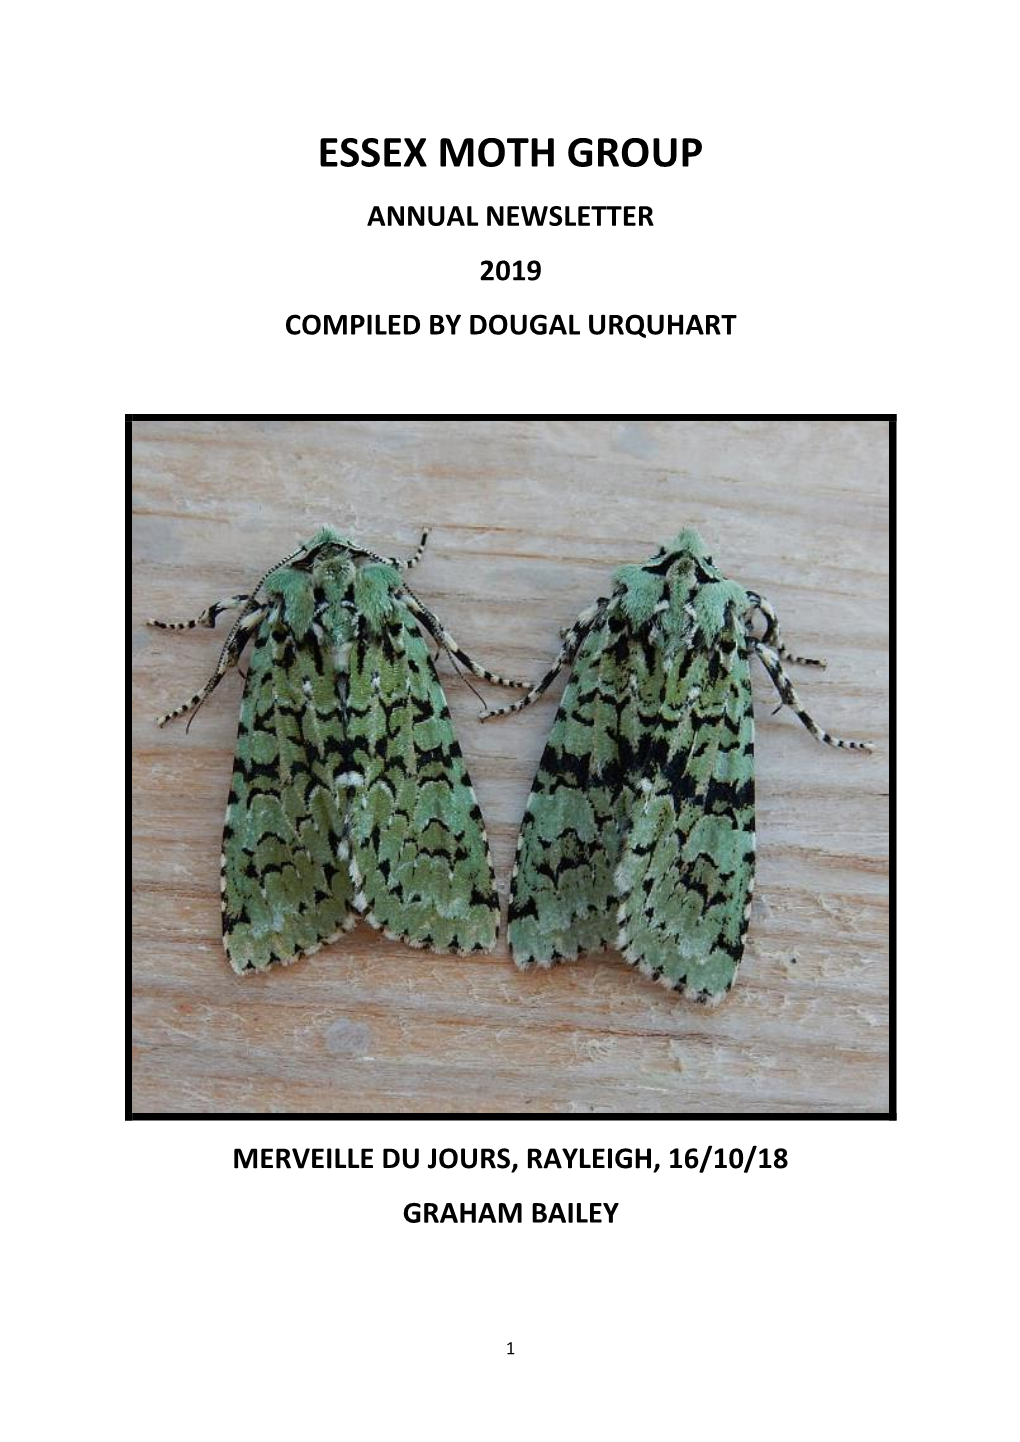 Essex Moth Group Annual Newsletter 2019 Compiled by Dougal Urquhart